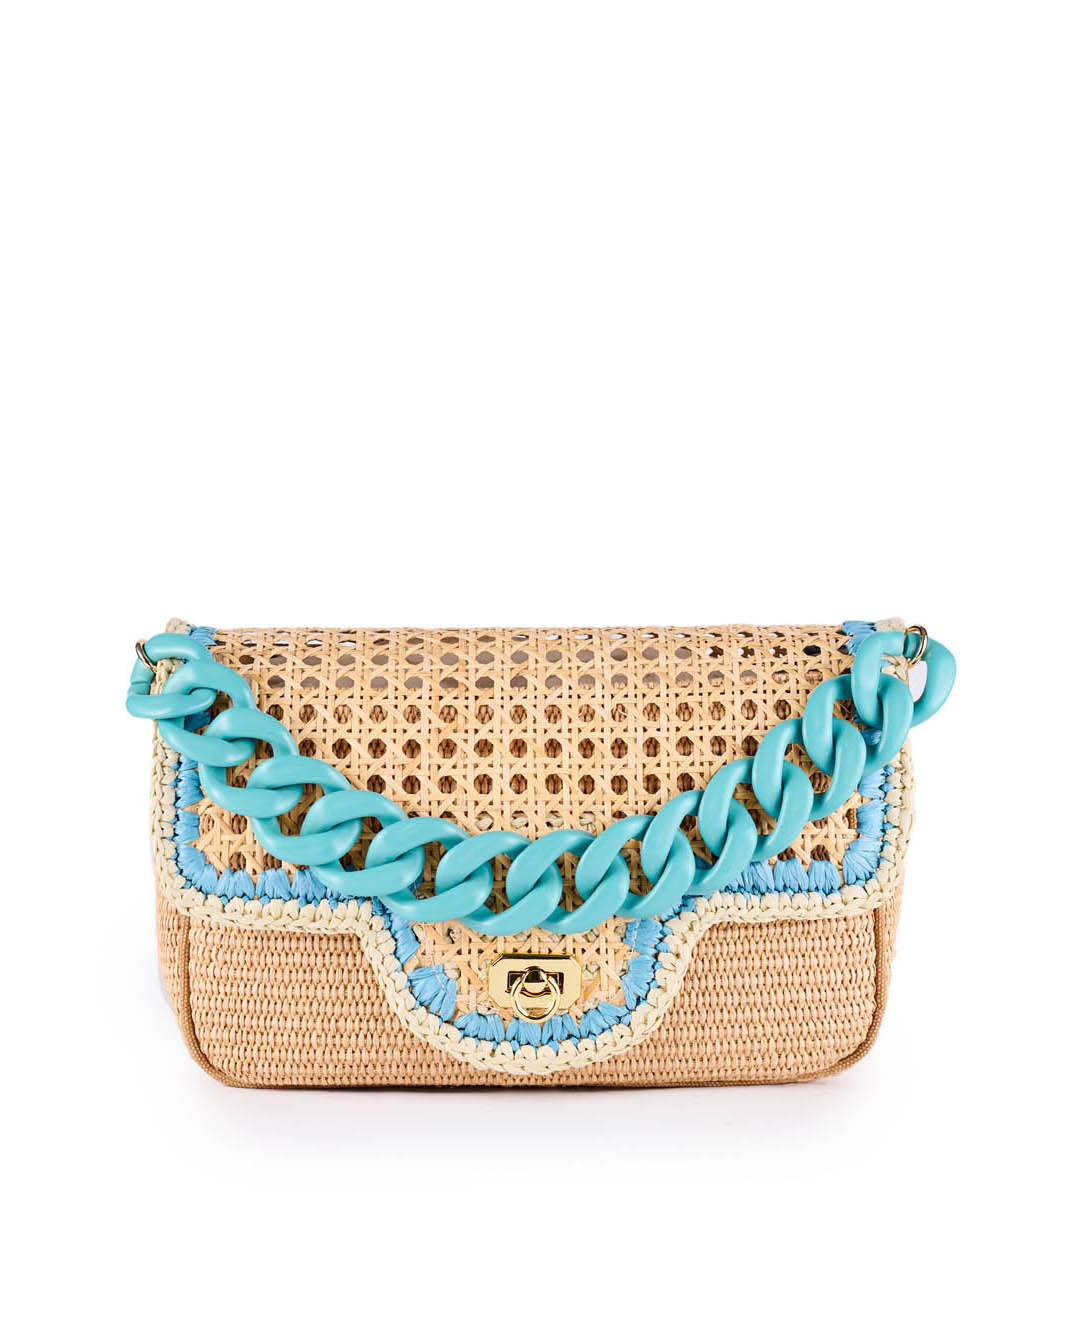 Beige woven rattan handbag with blue chain strap and gold clasp